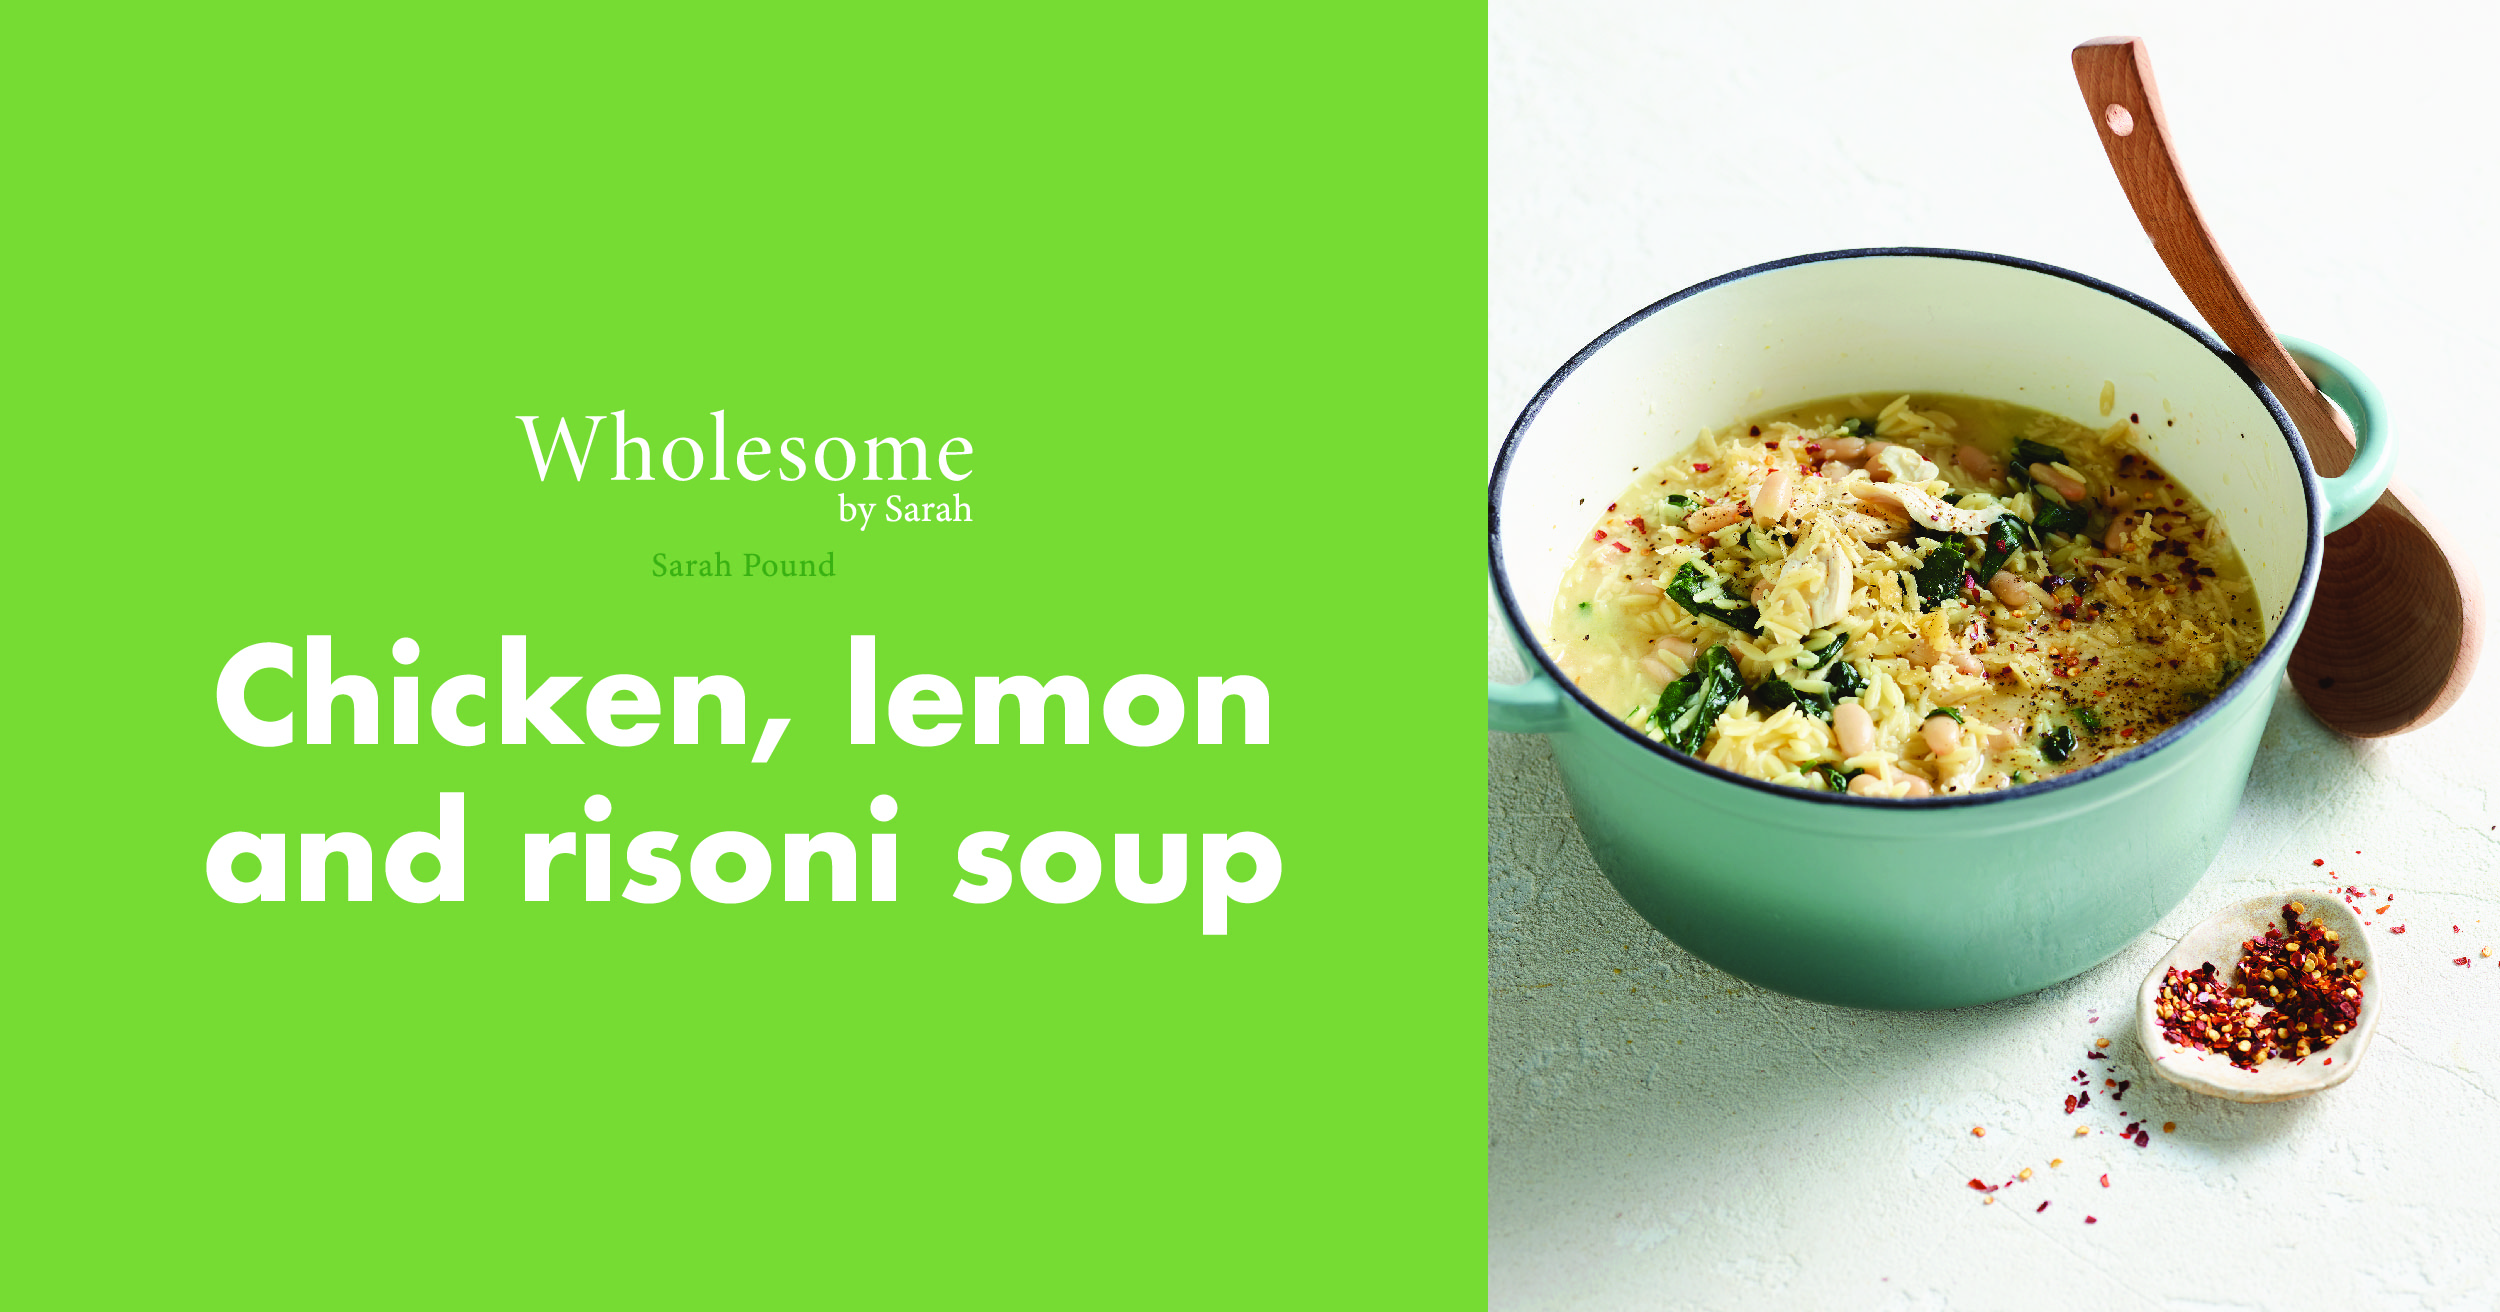 Chicken, lemon and risoni soup from Wholesome by Sarah by Sarah Pound